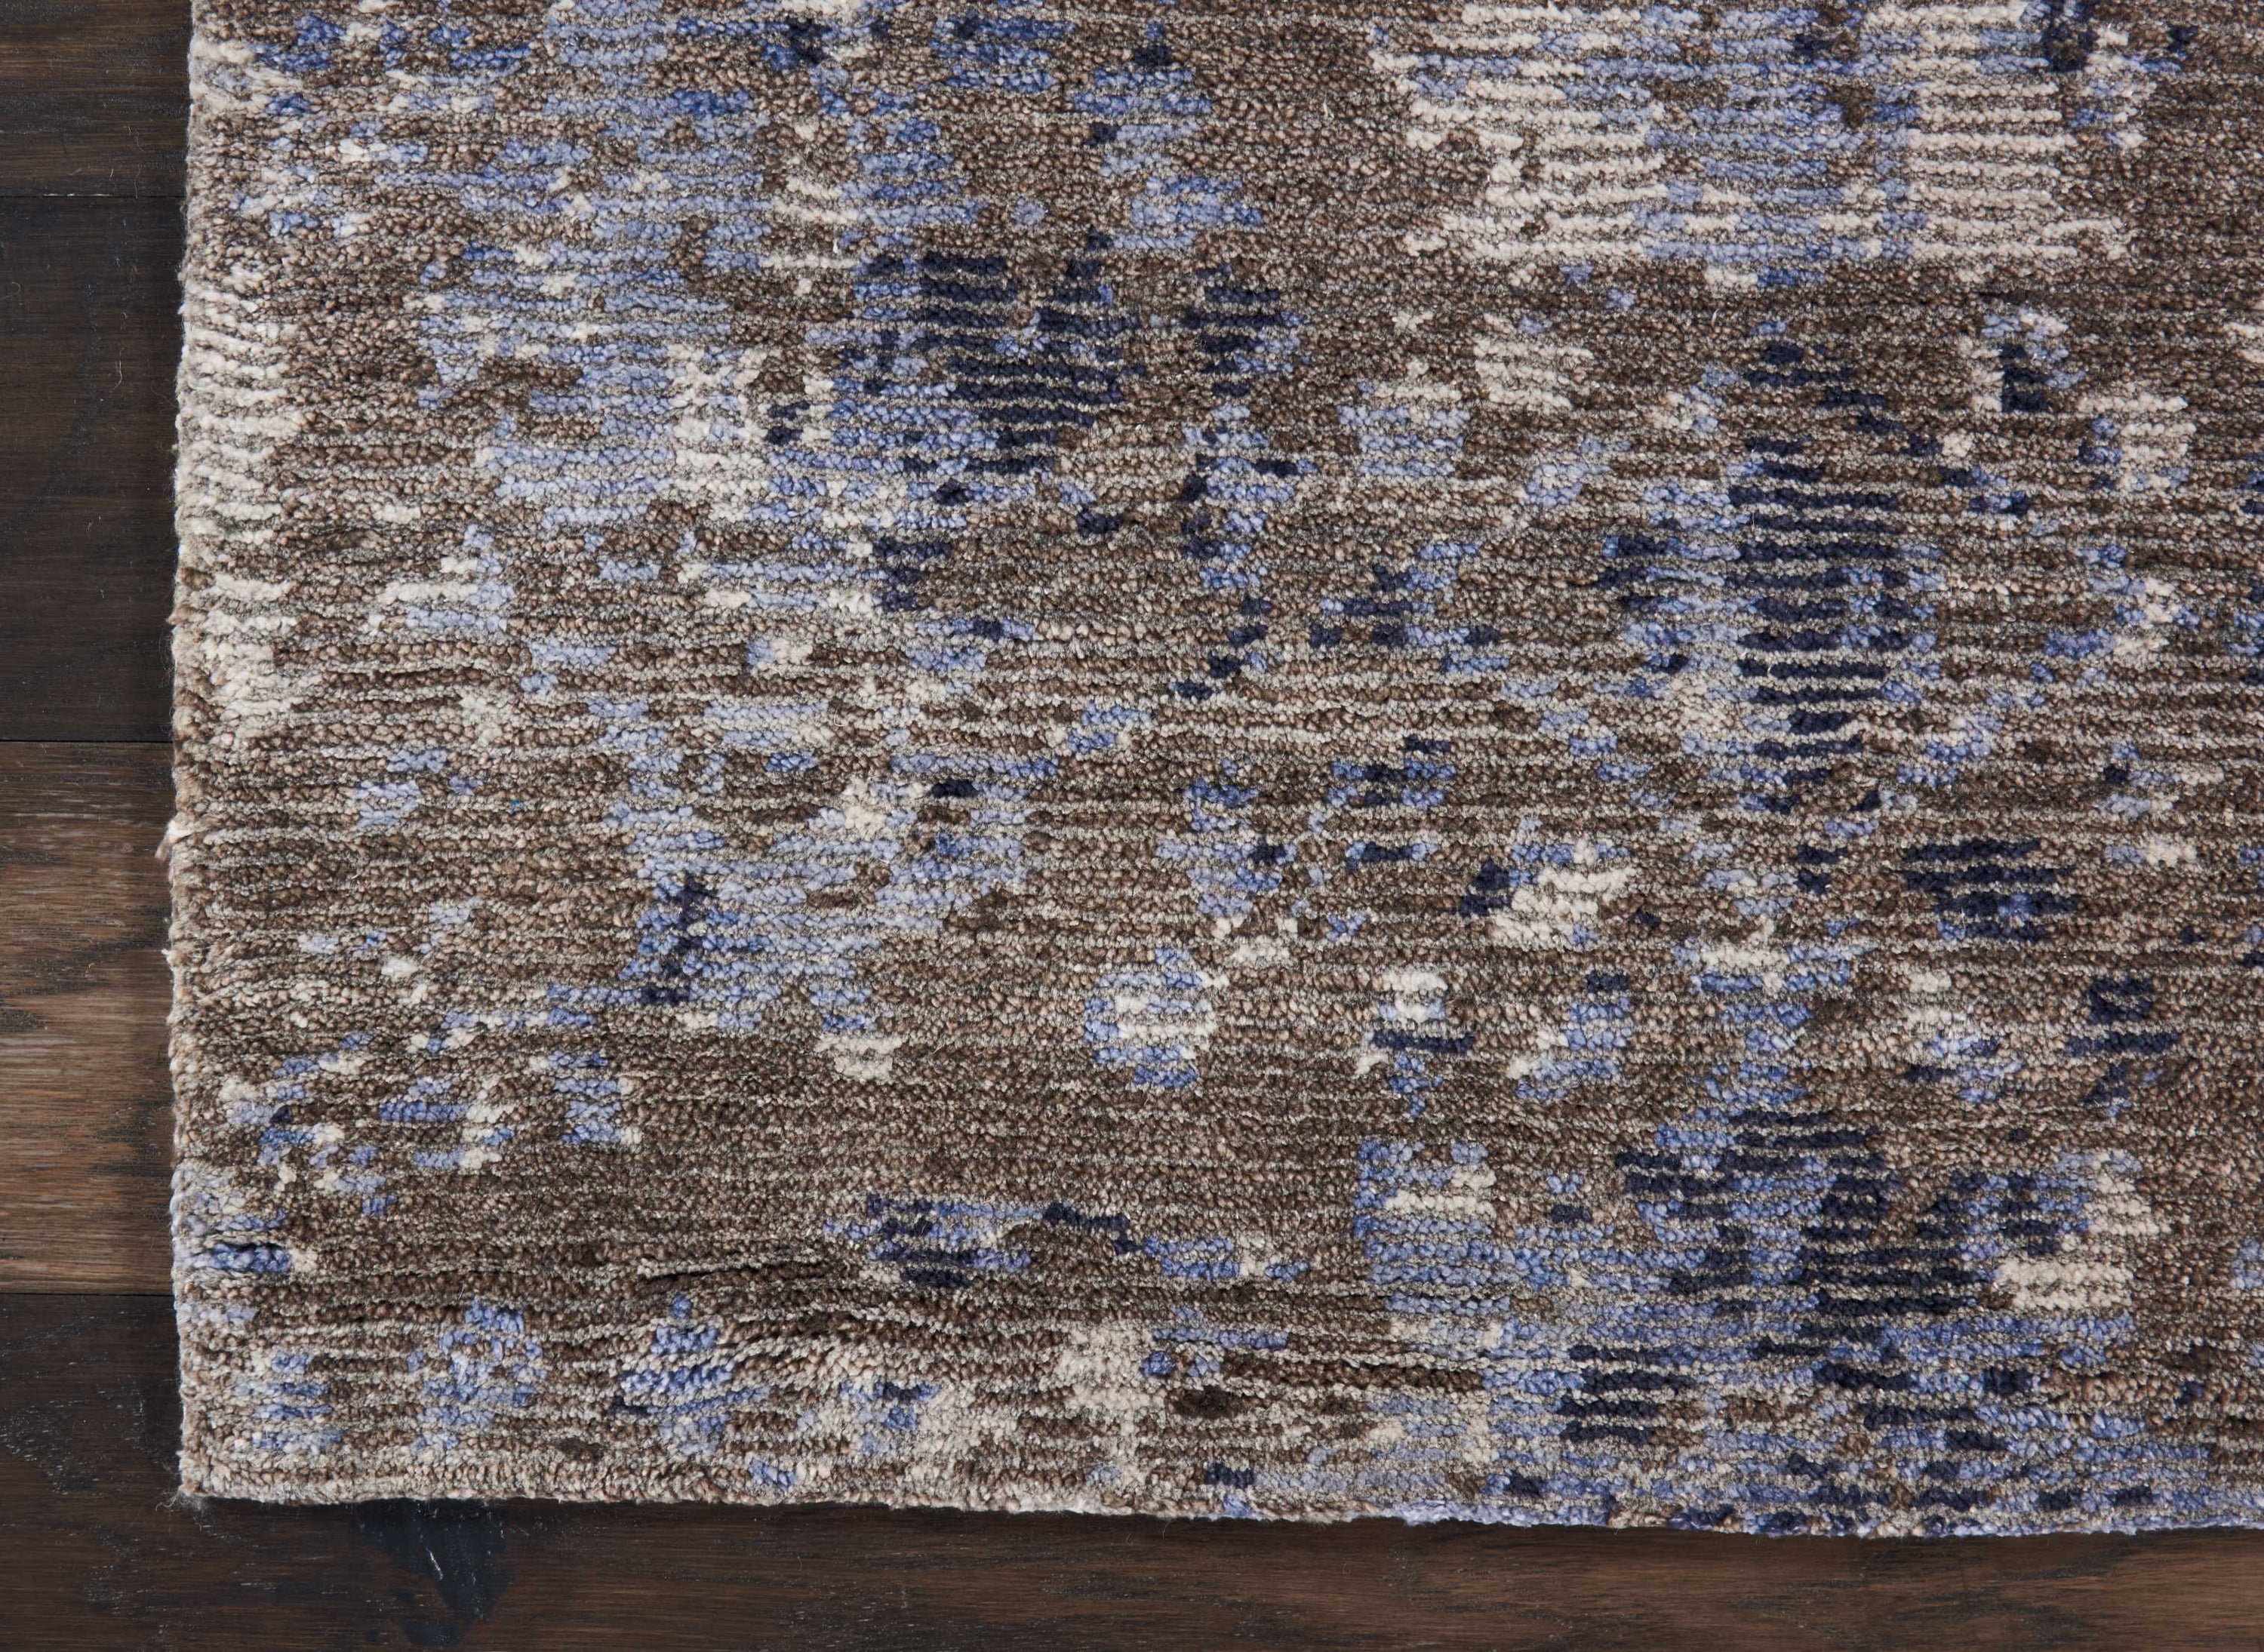 Close-up view of a textured area rug on a wooden floor.